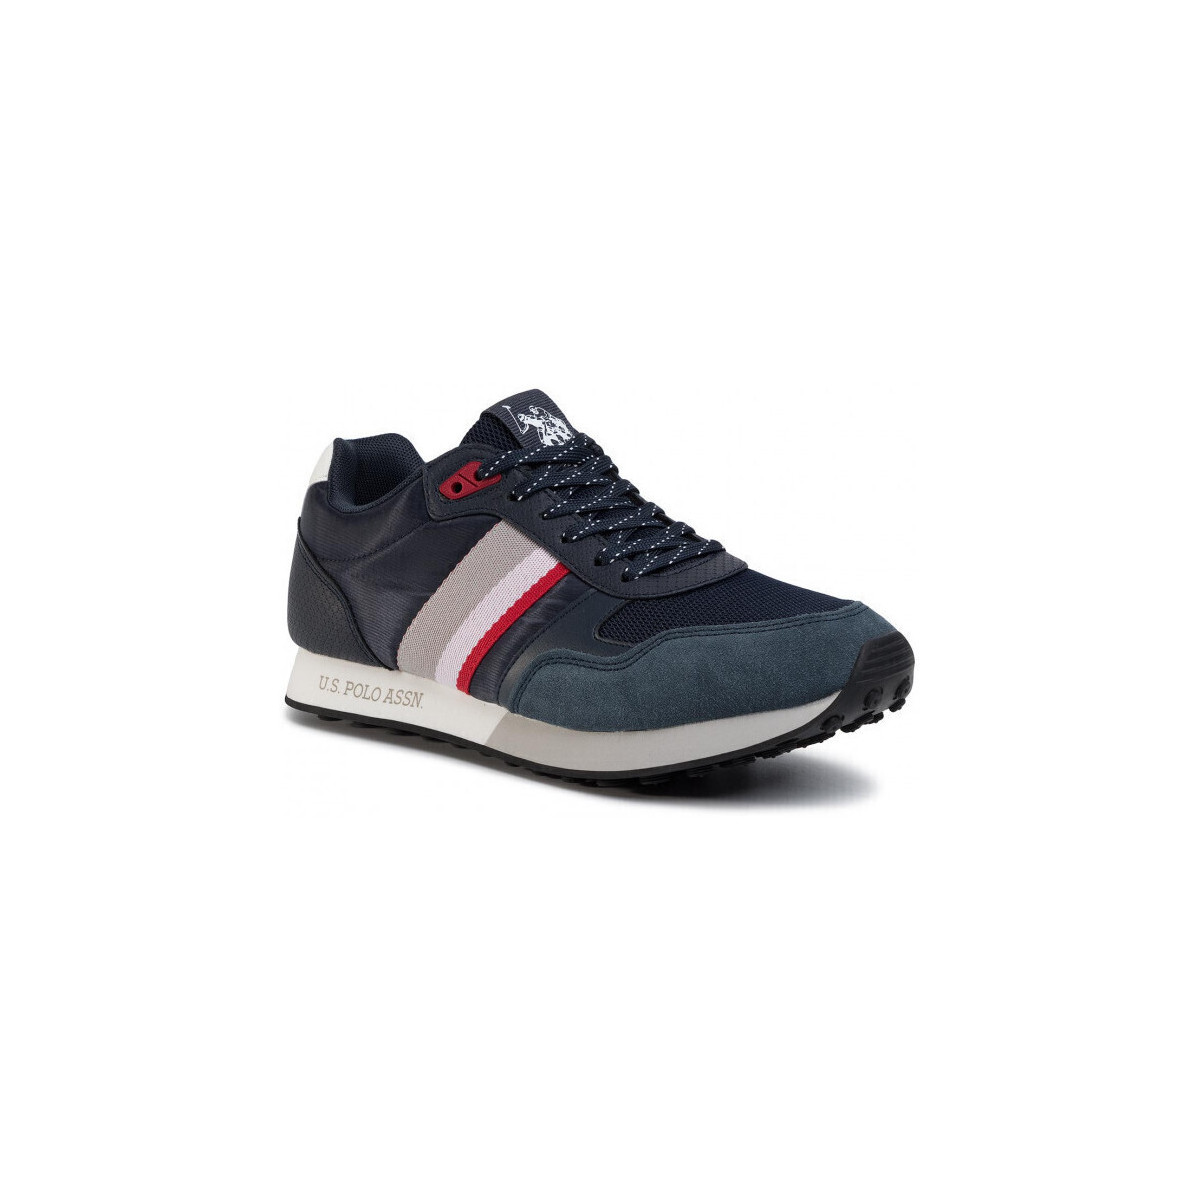 Sneakers U.S Polo Assn. Αθλητικά παπούτσια US POLO ASSN Julius2 FLASH4088S9SN2-DKBL